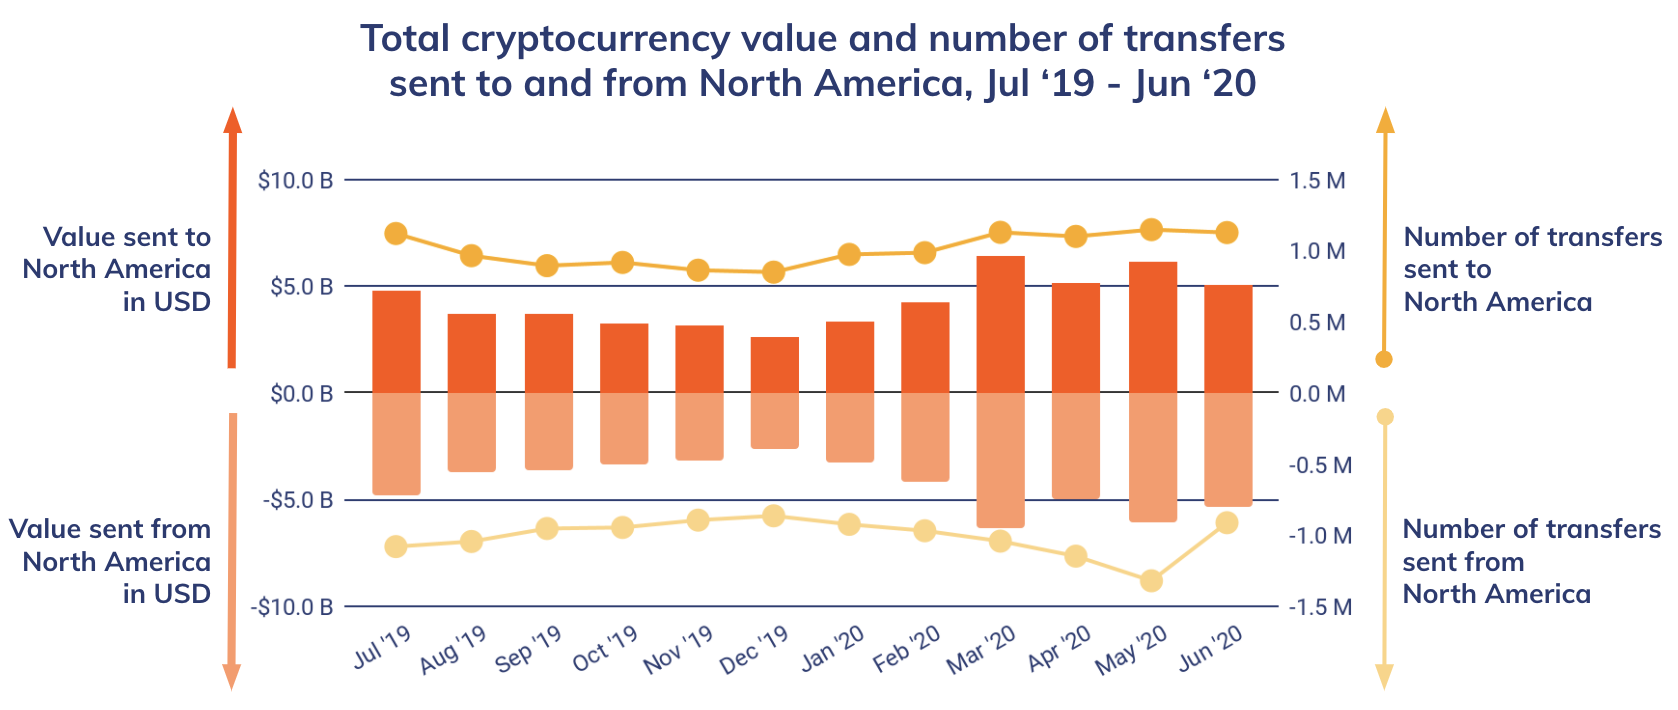 Blockchain Analytics Show Altcoins 2x More Prominent in East Asia Compared to North America